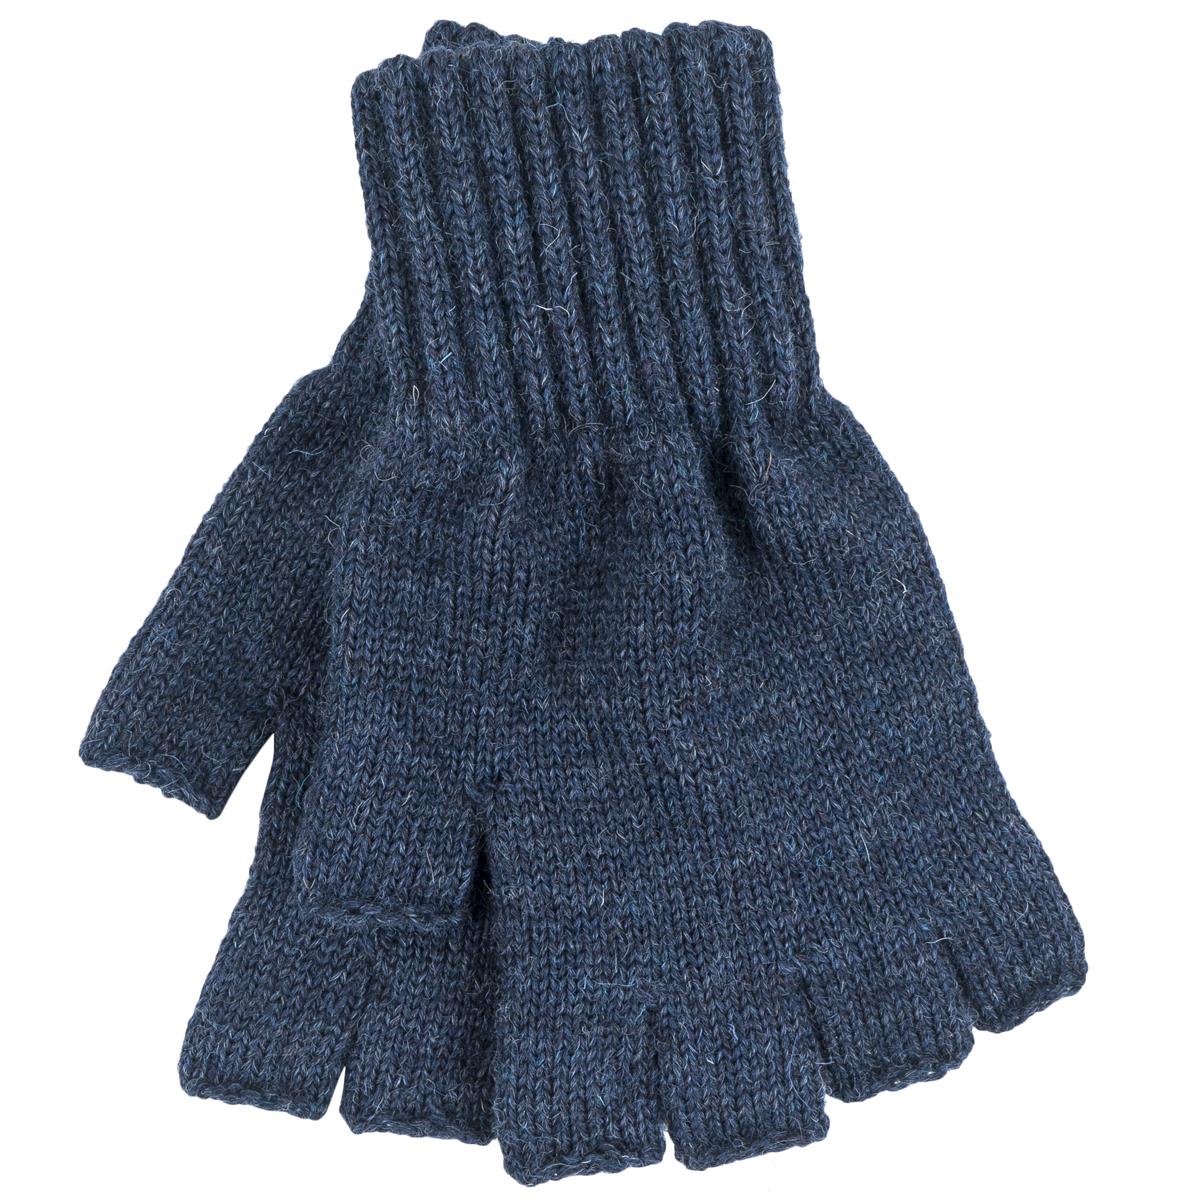 When can the Barbour fingerless gloves be utilized?